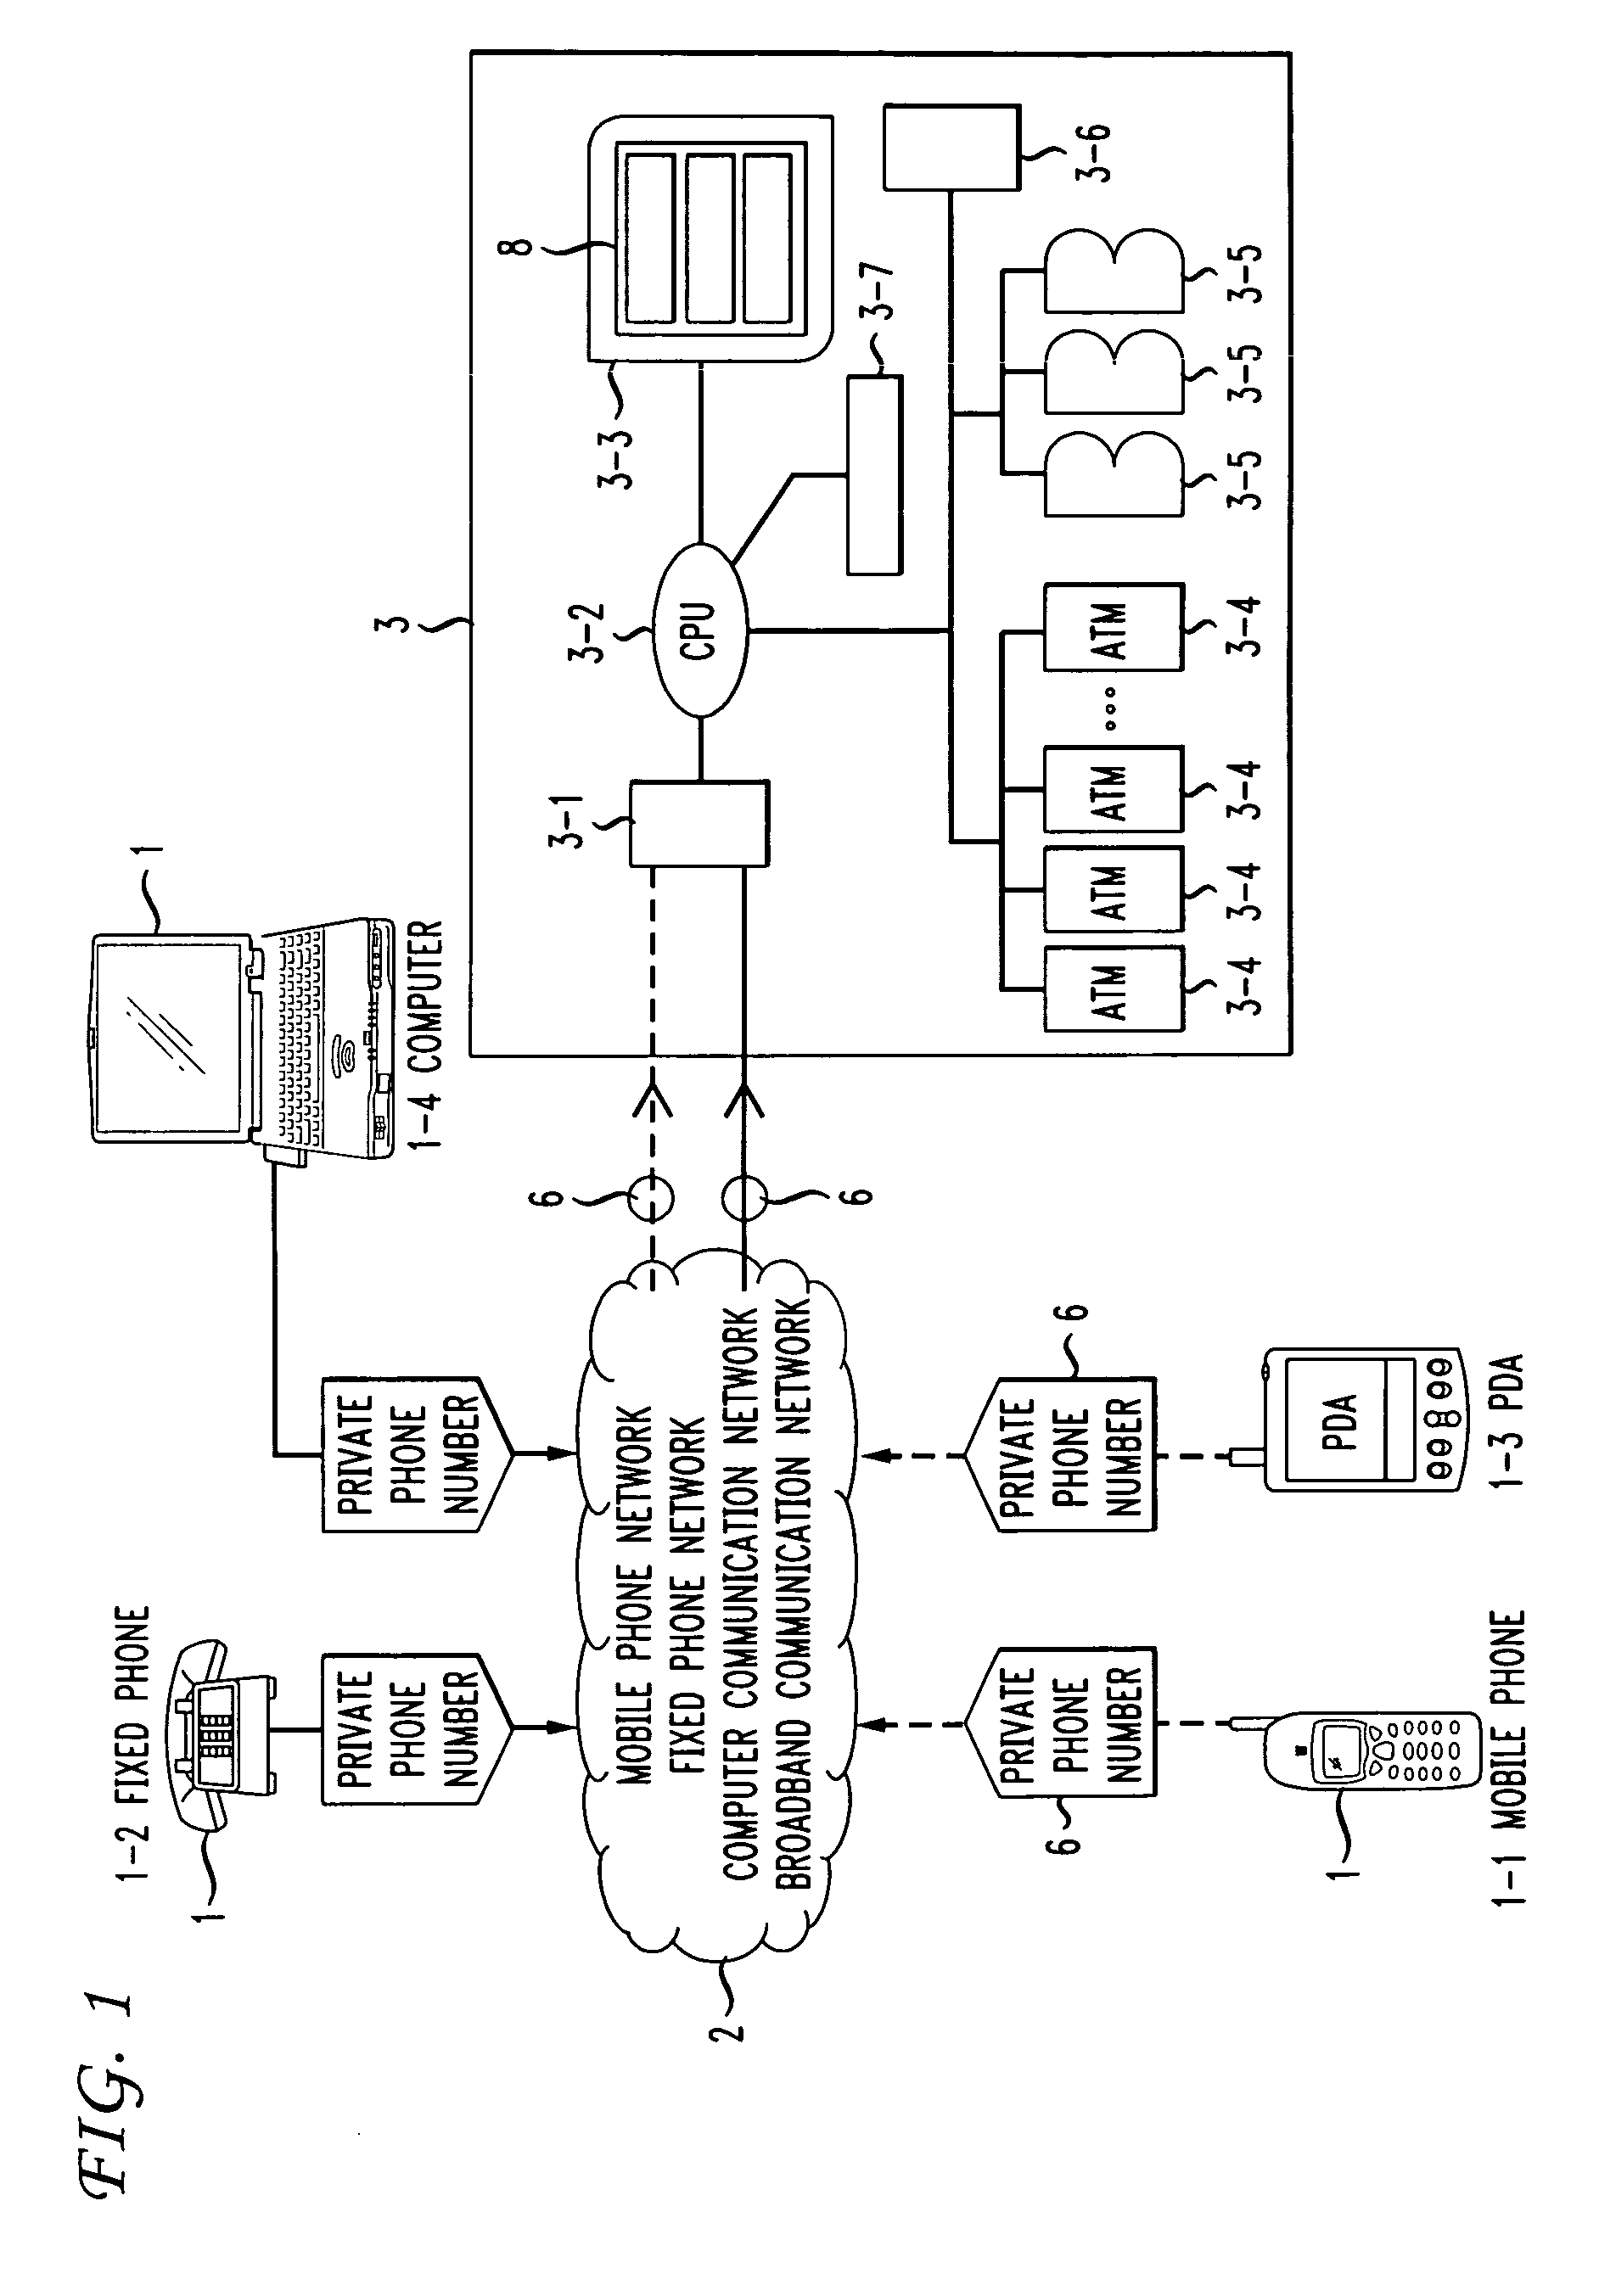 Banking computer account system with lock for secure payment via telephone